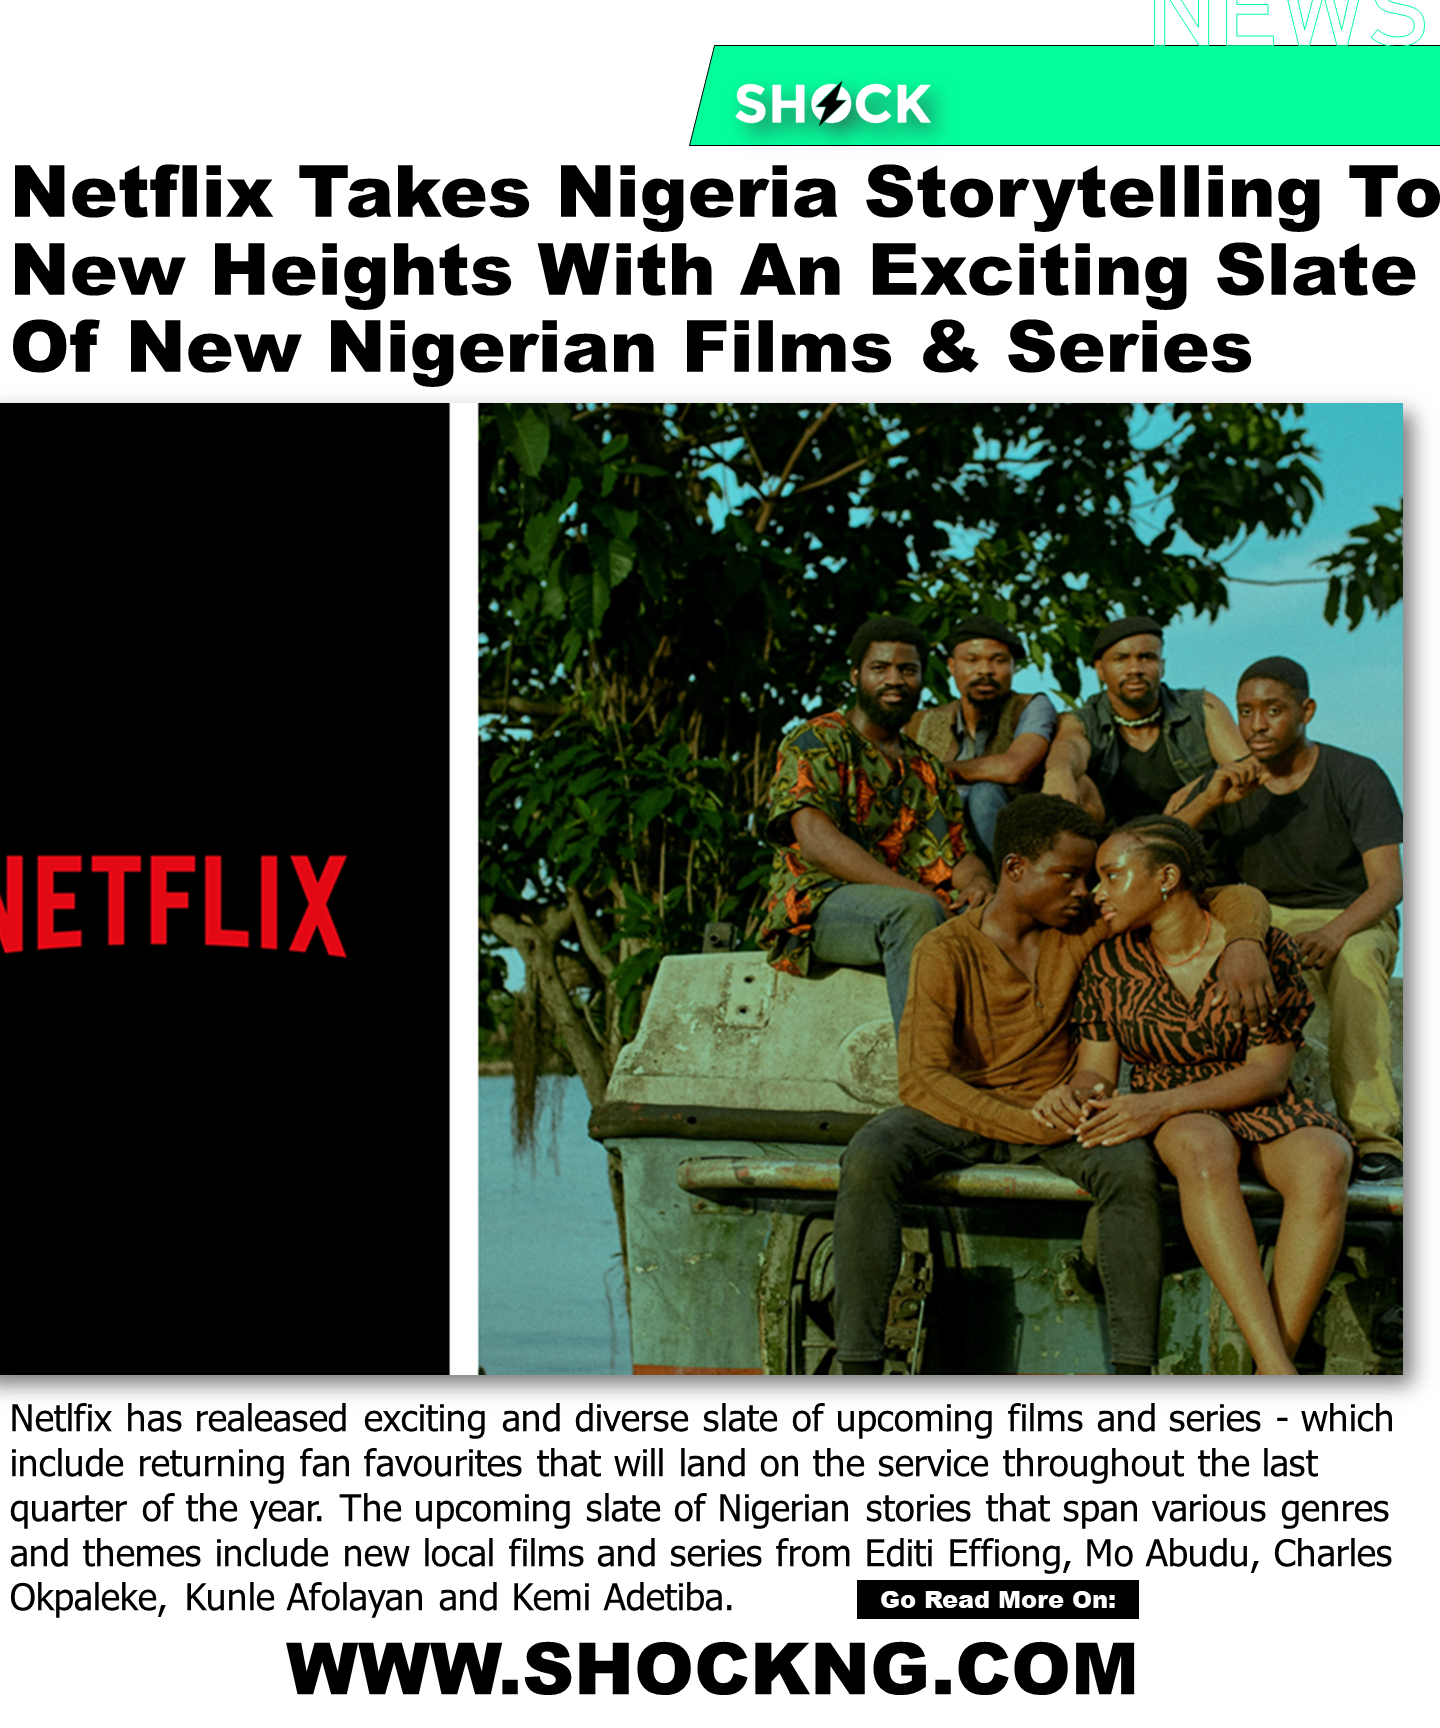 Netlfix blockbuster slate - Netflix Takes Nigeria Storytelling To New Heights With An Exciting Slate Of New Nigerian Films & Series